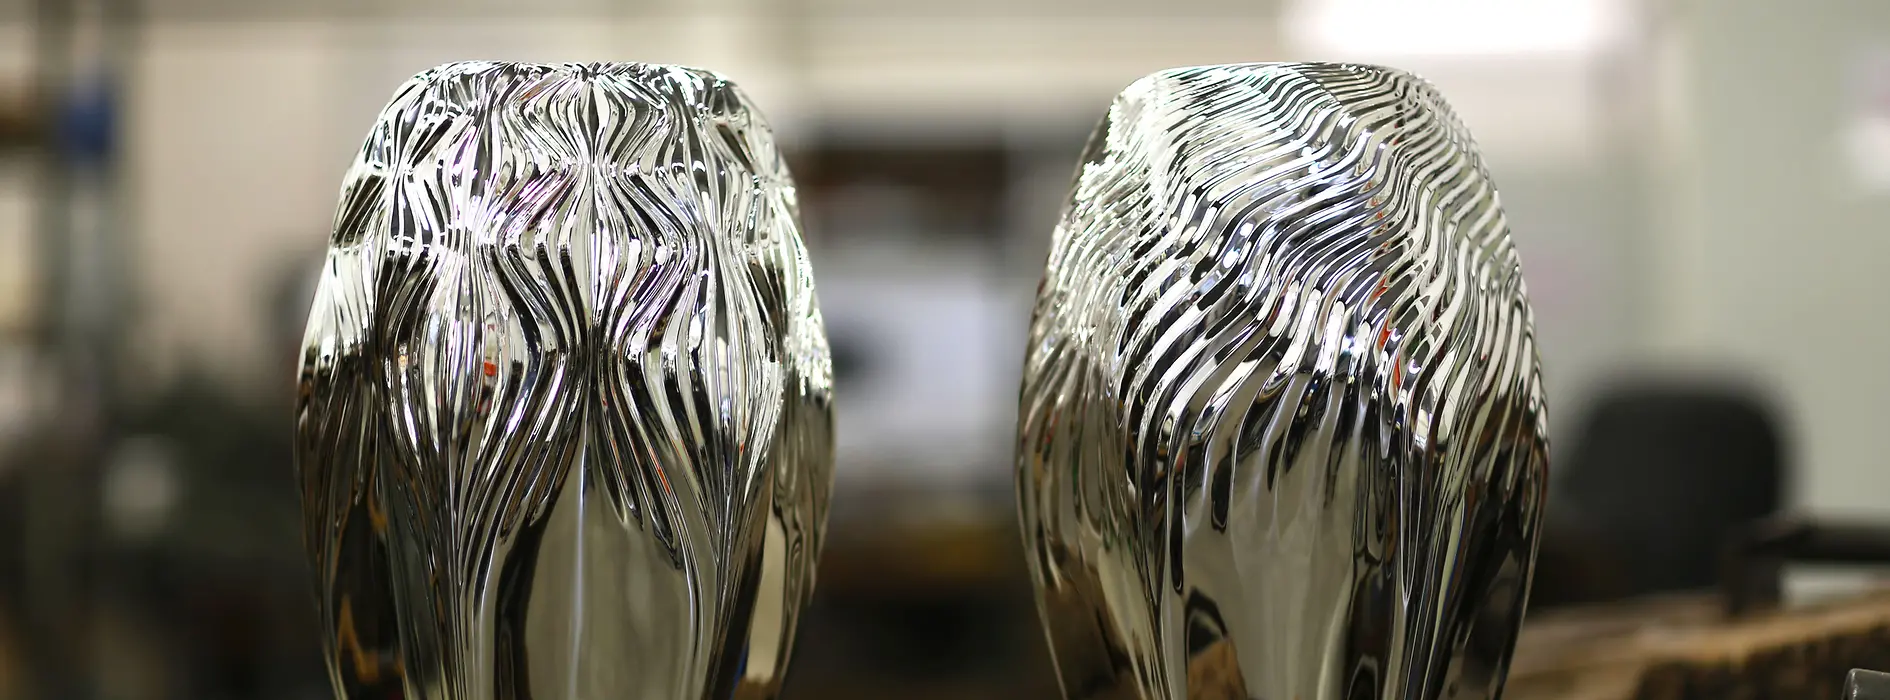 Vases in a design by Zaha Hadid for the Vienna Silver Factory